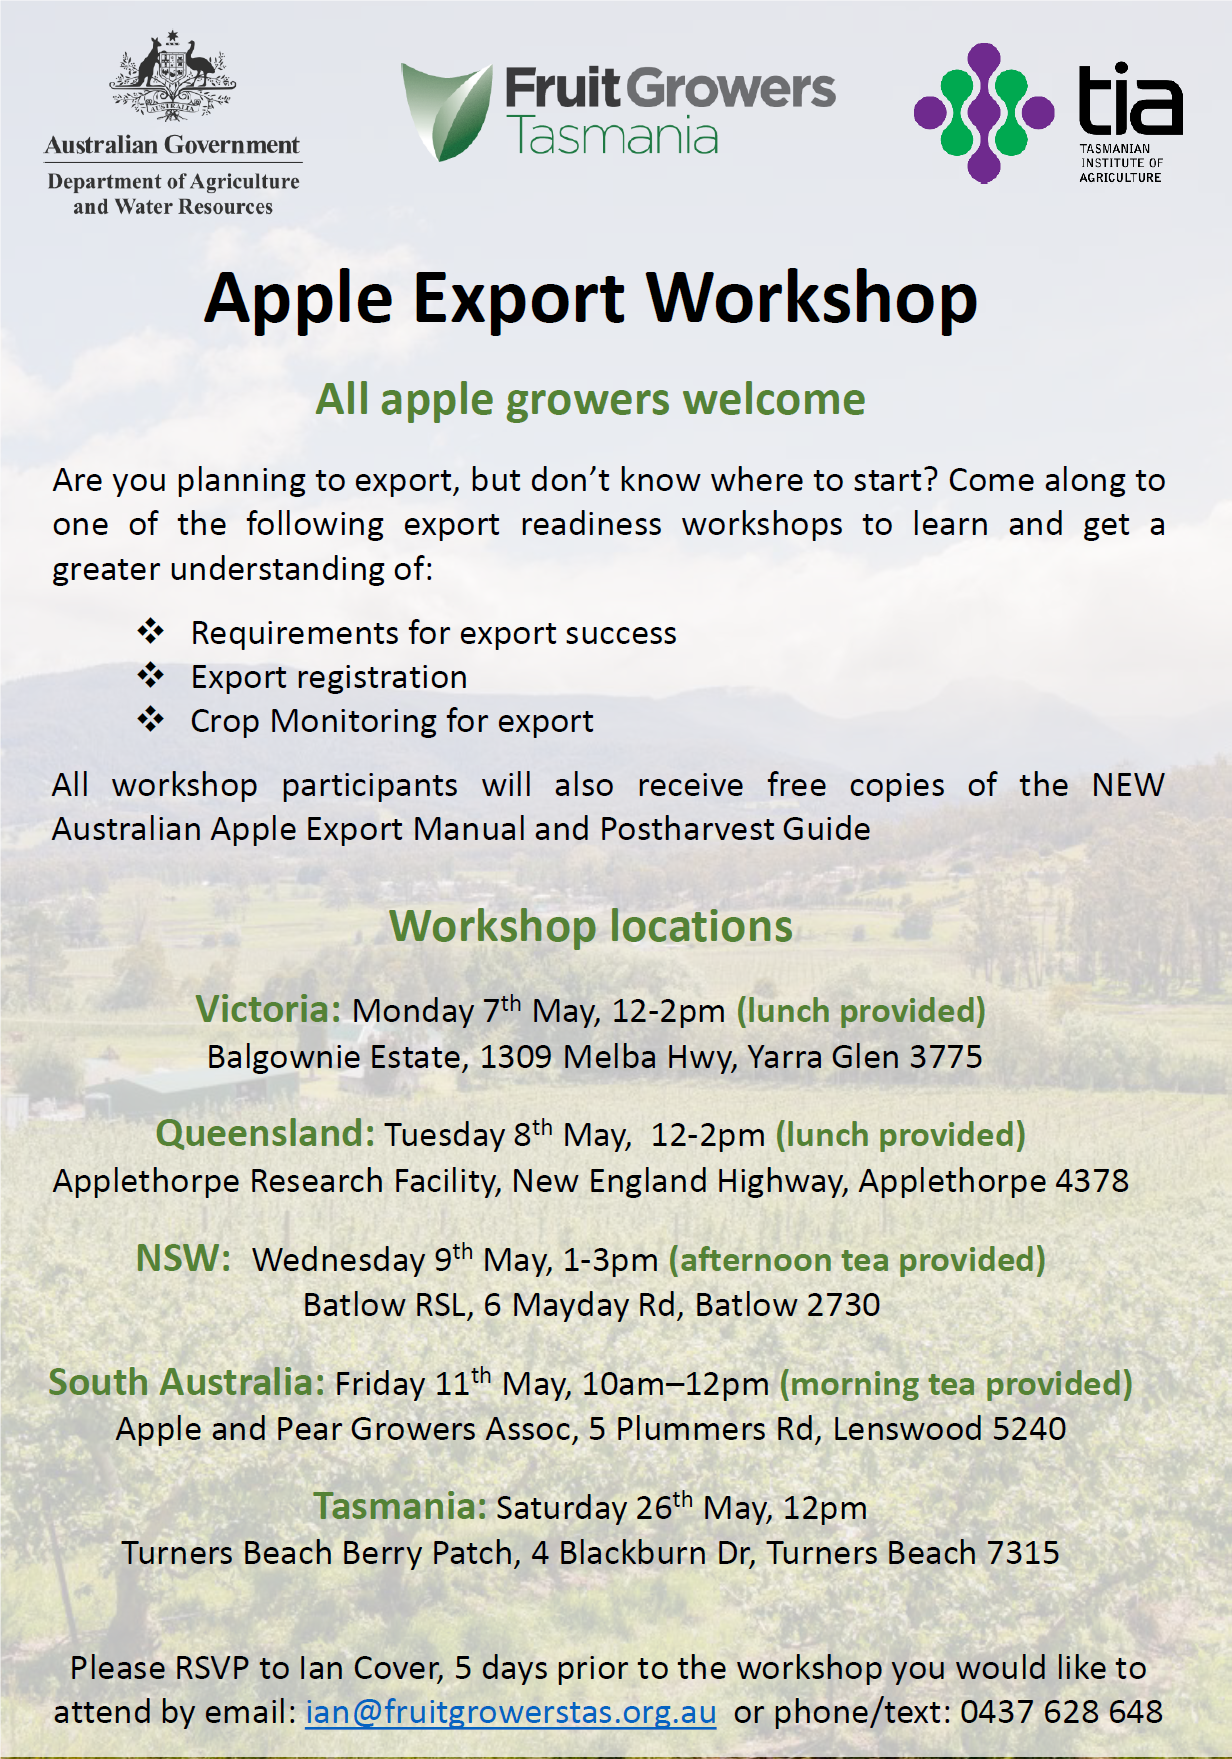 Apple Export Workshop- Monday 7th May 2018 from 12noon-2pm to be held at Balgownie Estate, Yarra Glen